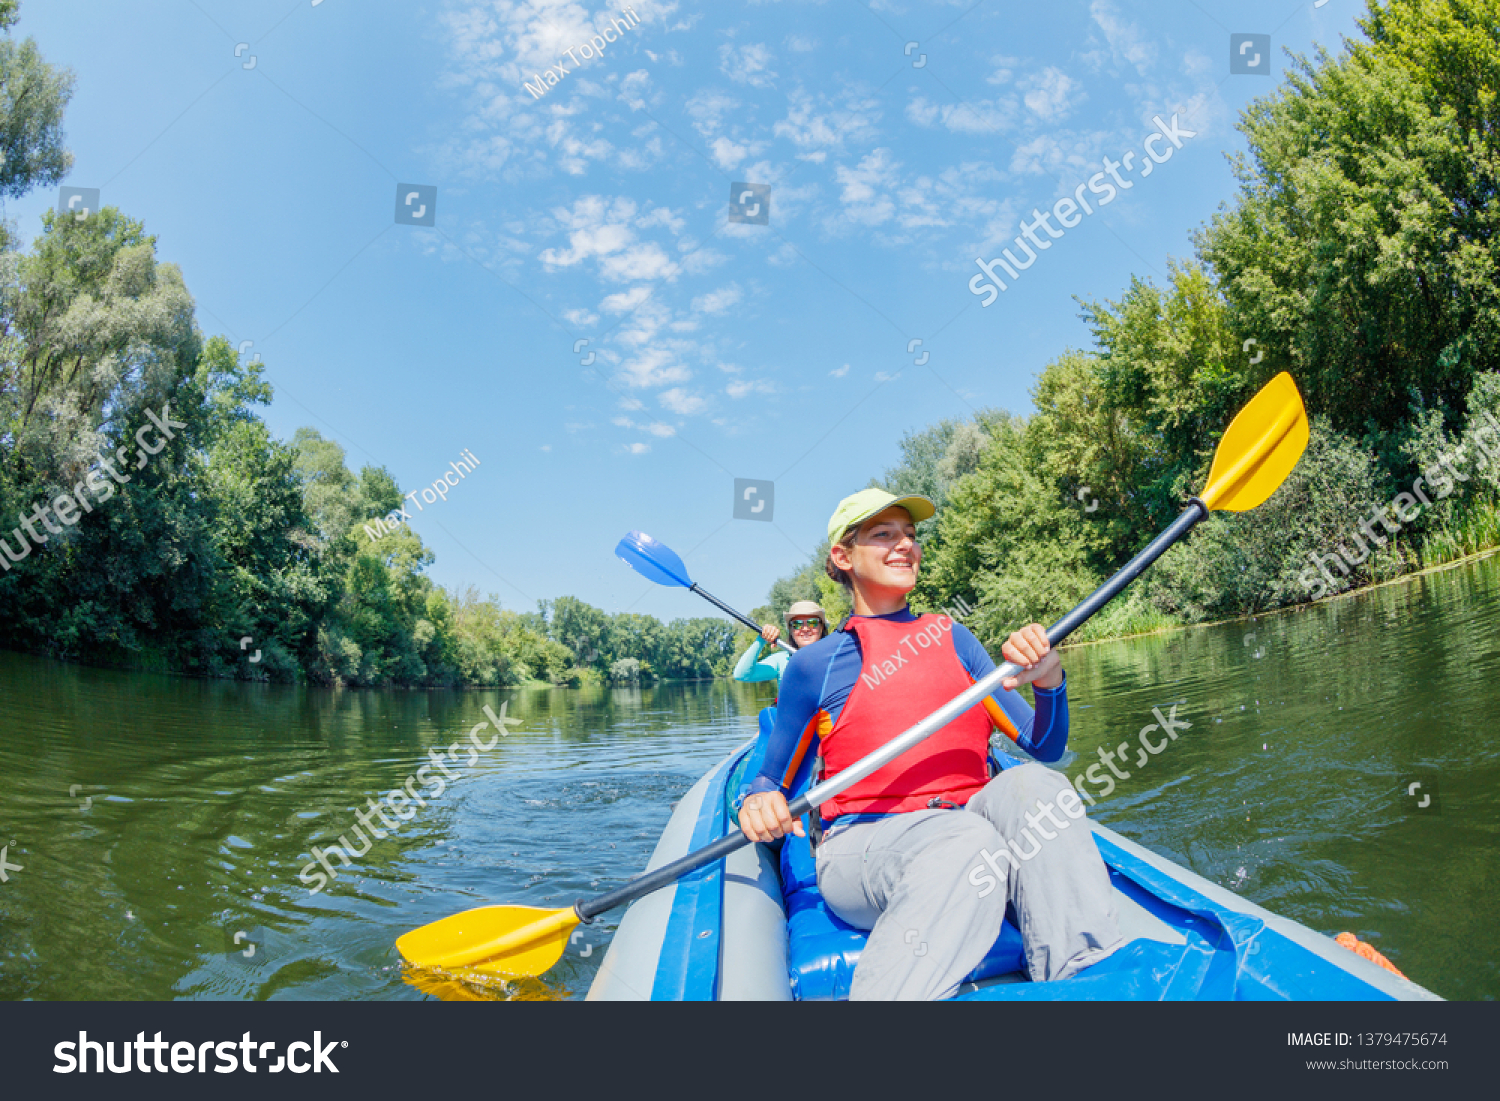 Happy family kayaking on the river. Active girl with her mother having fun enjoying adventurous experience with kayak on a sunny day during summer vacation #1379475674